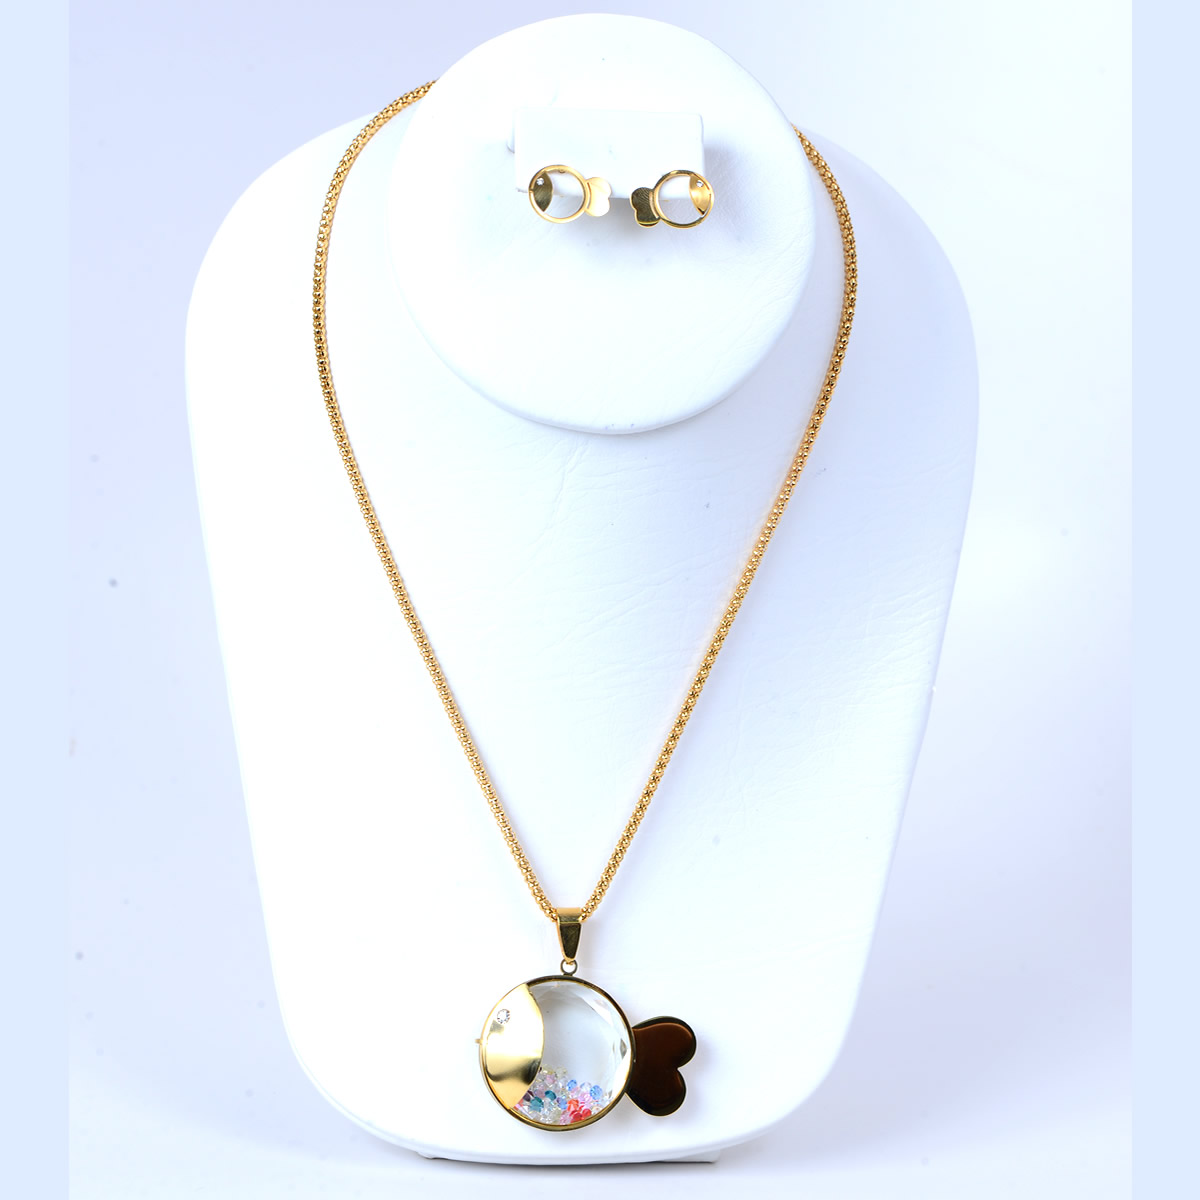 Adorable Fish Necklace and Earrings Set